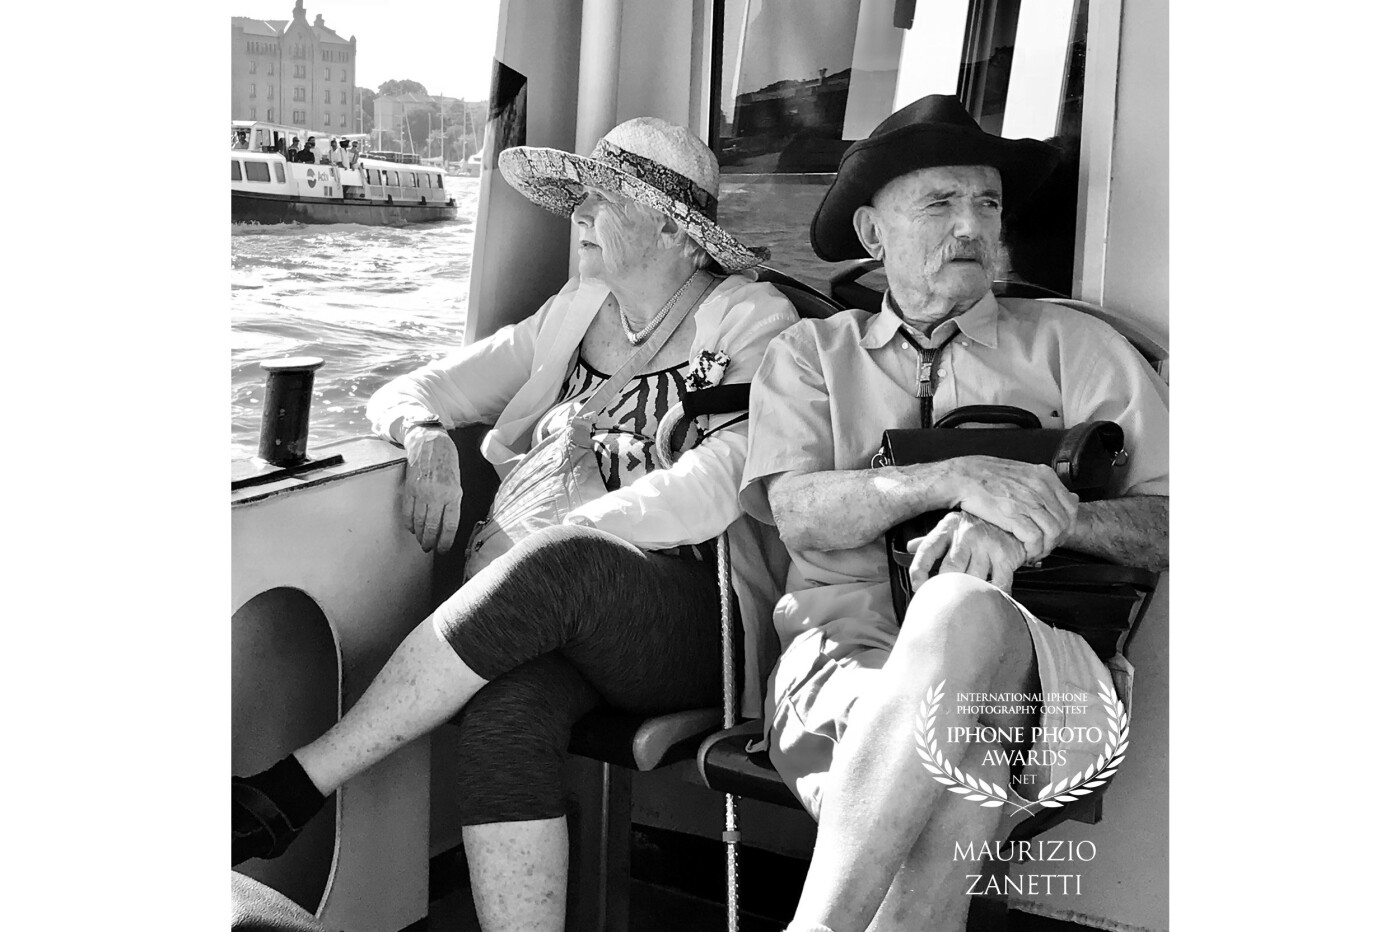 October 2018, a warm autumn day in Venice. On the vaporetto two American tourists. From his clothing they look like Texans. She looks at Giudecca and Molino Stucky, he watches the "zattere" from 100 ice-cream shops. I, indiscreet, shoot out with the iPhone and take the picture.